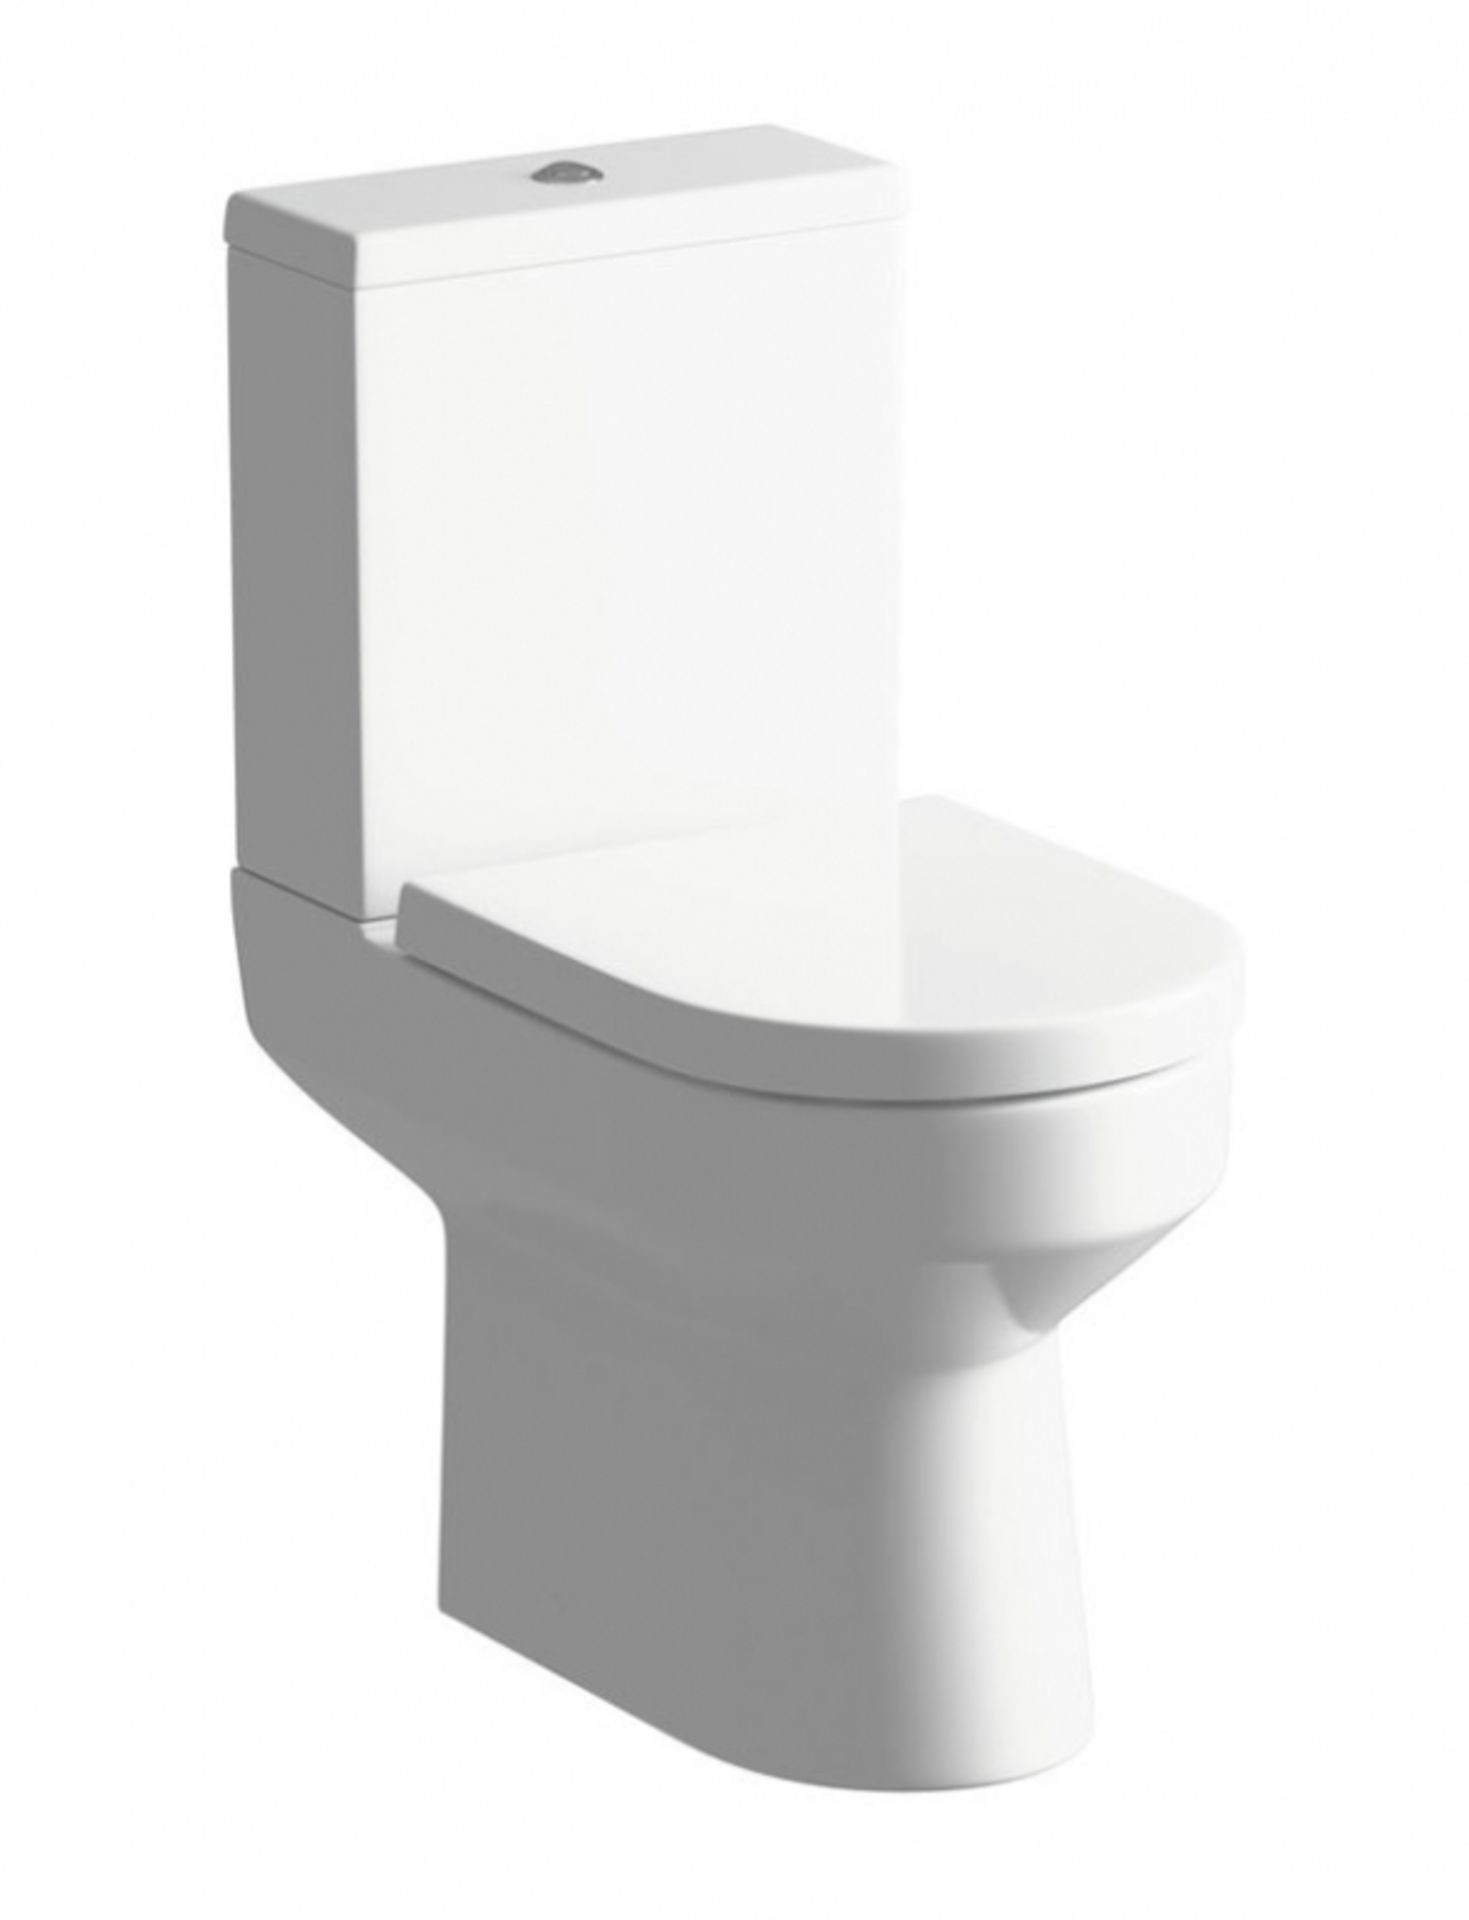 New & Boxed Lauruc Close Coupled Wc Inc Soft Close Toilet Seat. RRP £495.00.Close Coupled Wc ... - Image 2 of 2